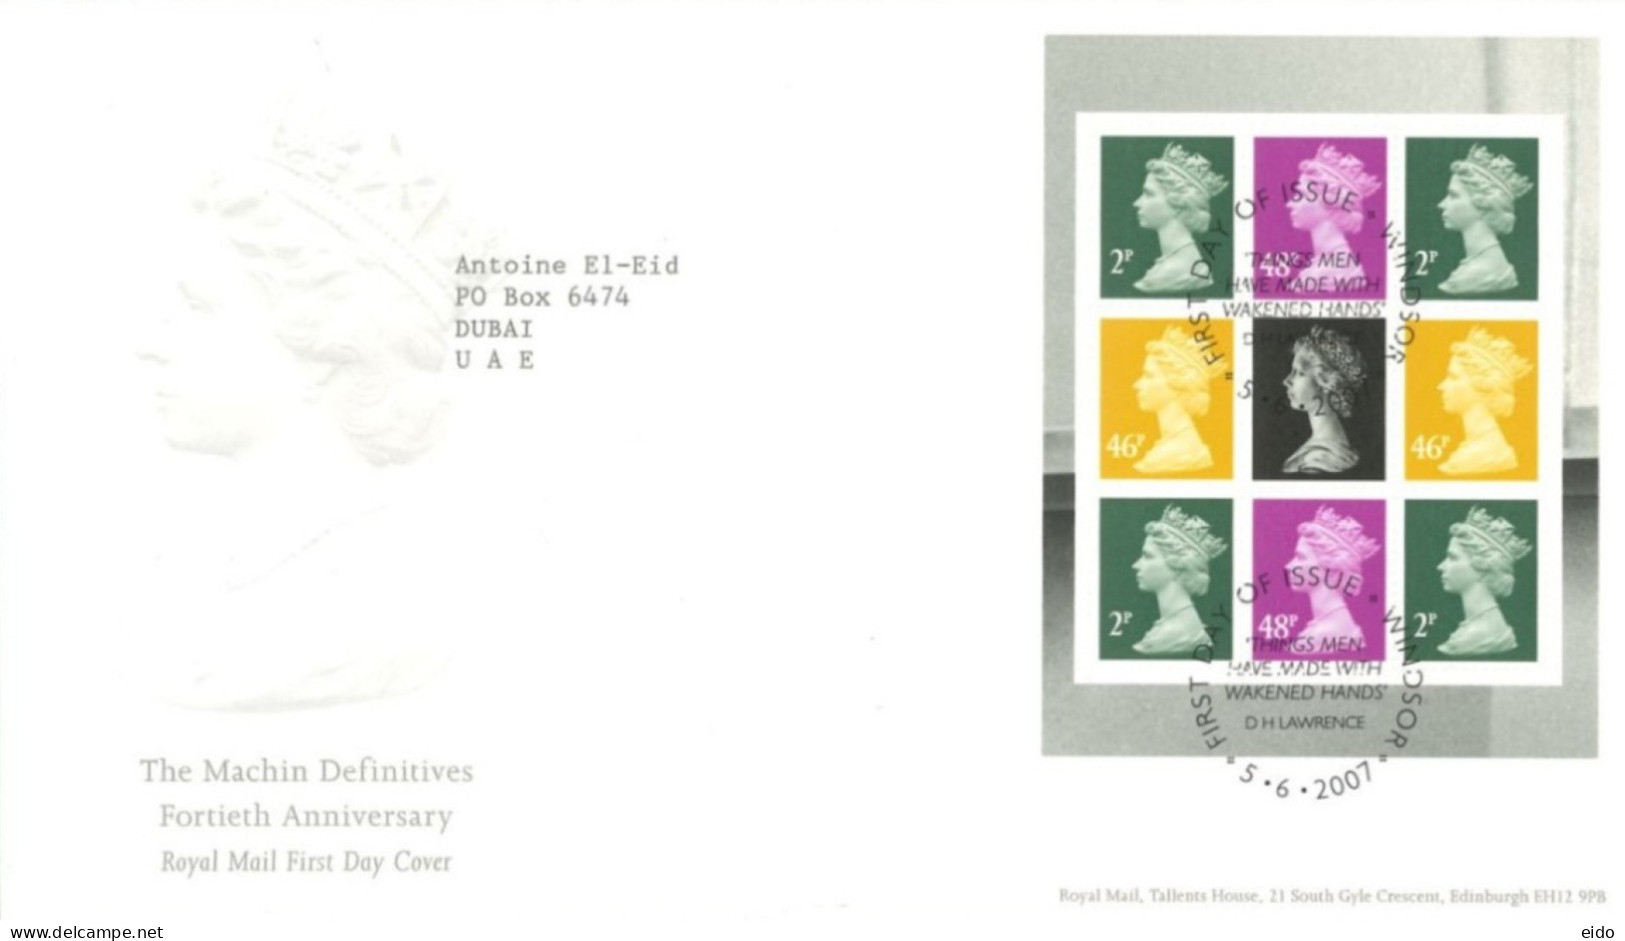 GREAT BRITAIN  - 2007, FDC OF THE MACHIN DEFINITIVES FORTIETH ANNIVERSARY STAMPS SHEET INCLUDING PRESENTATION CARD - Covers & Documents